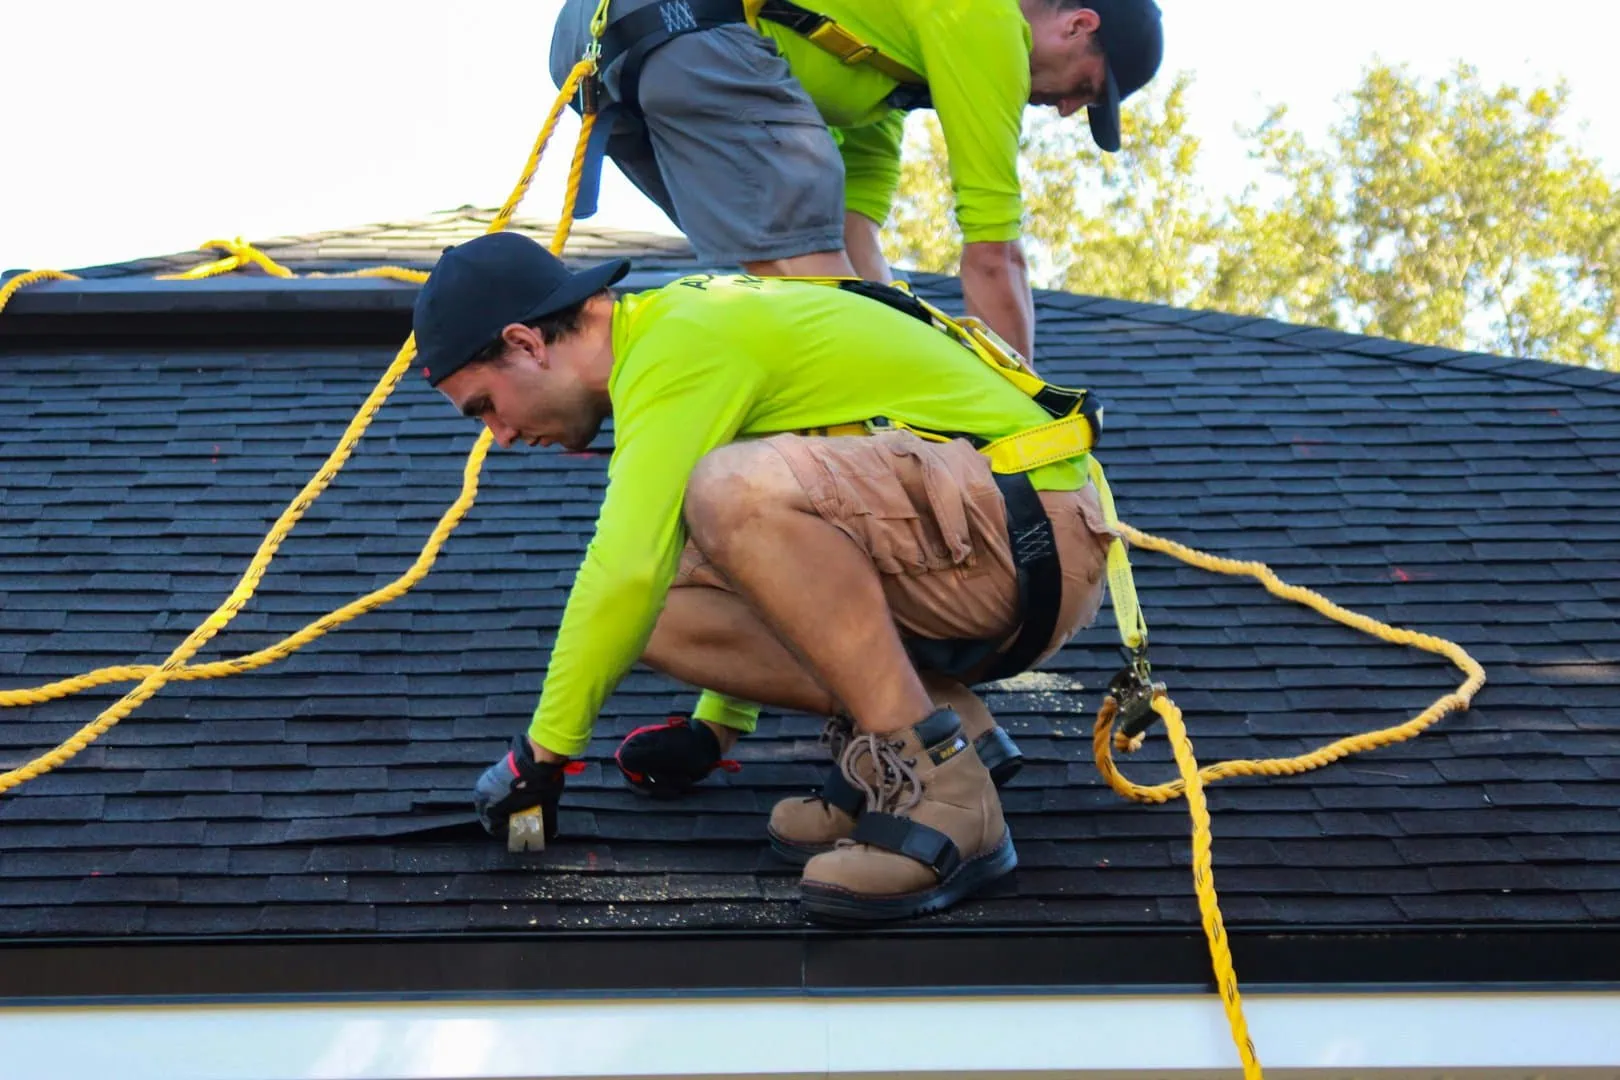 Two roofers with tethers repairing shingle roof